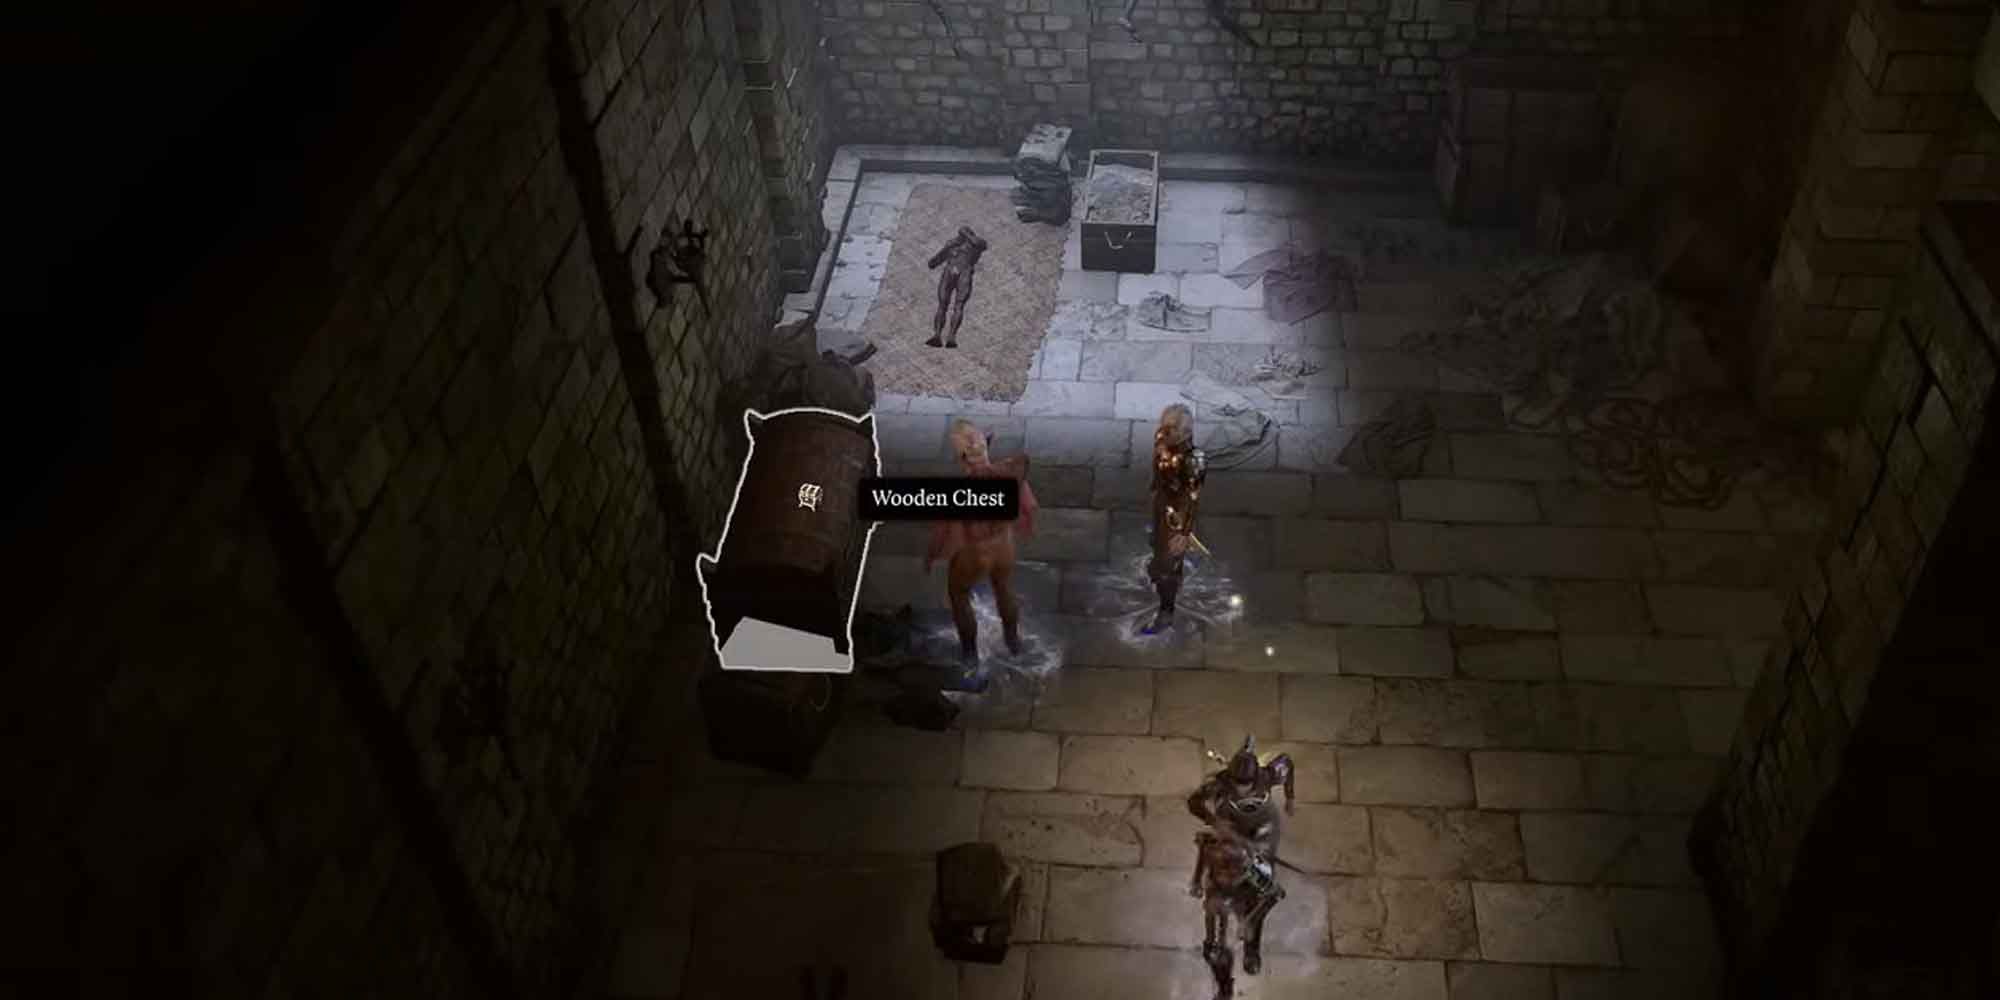 Using the Knock spell on a locked chest in Baldur's Gate 3